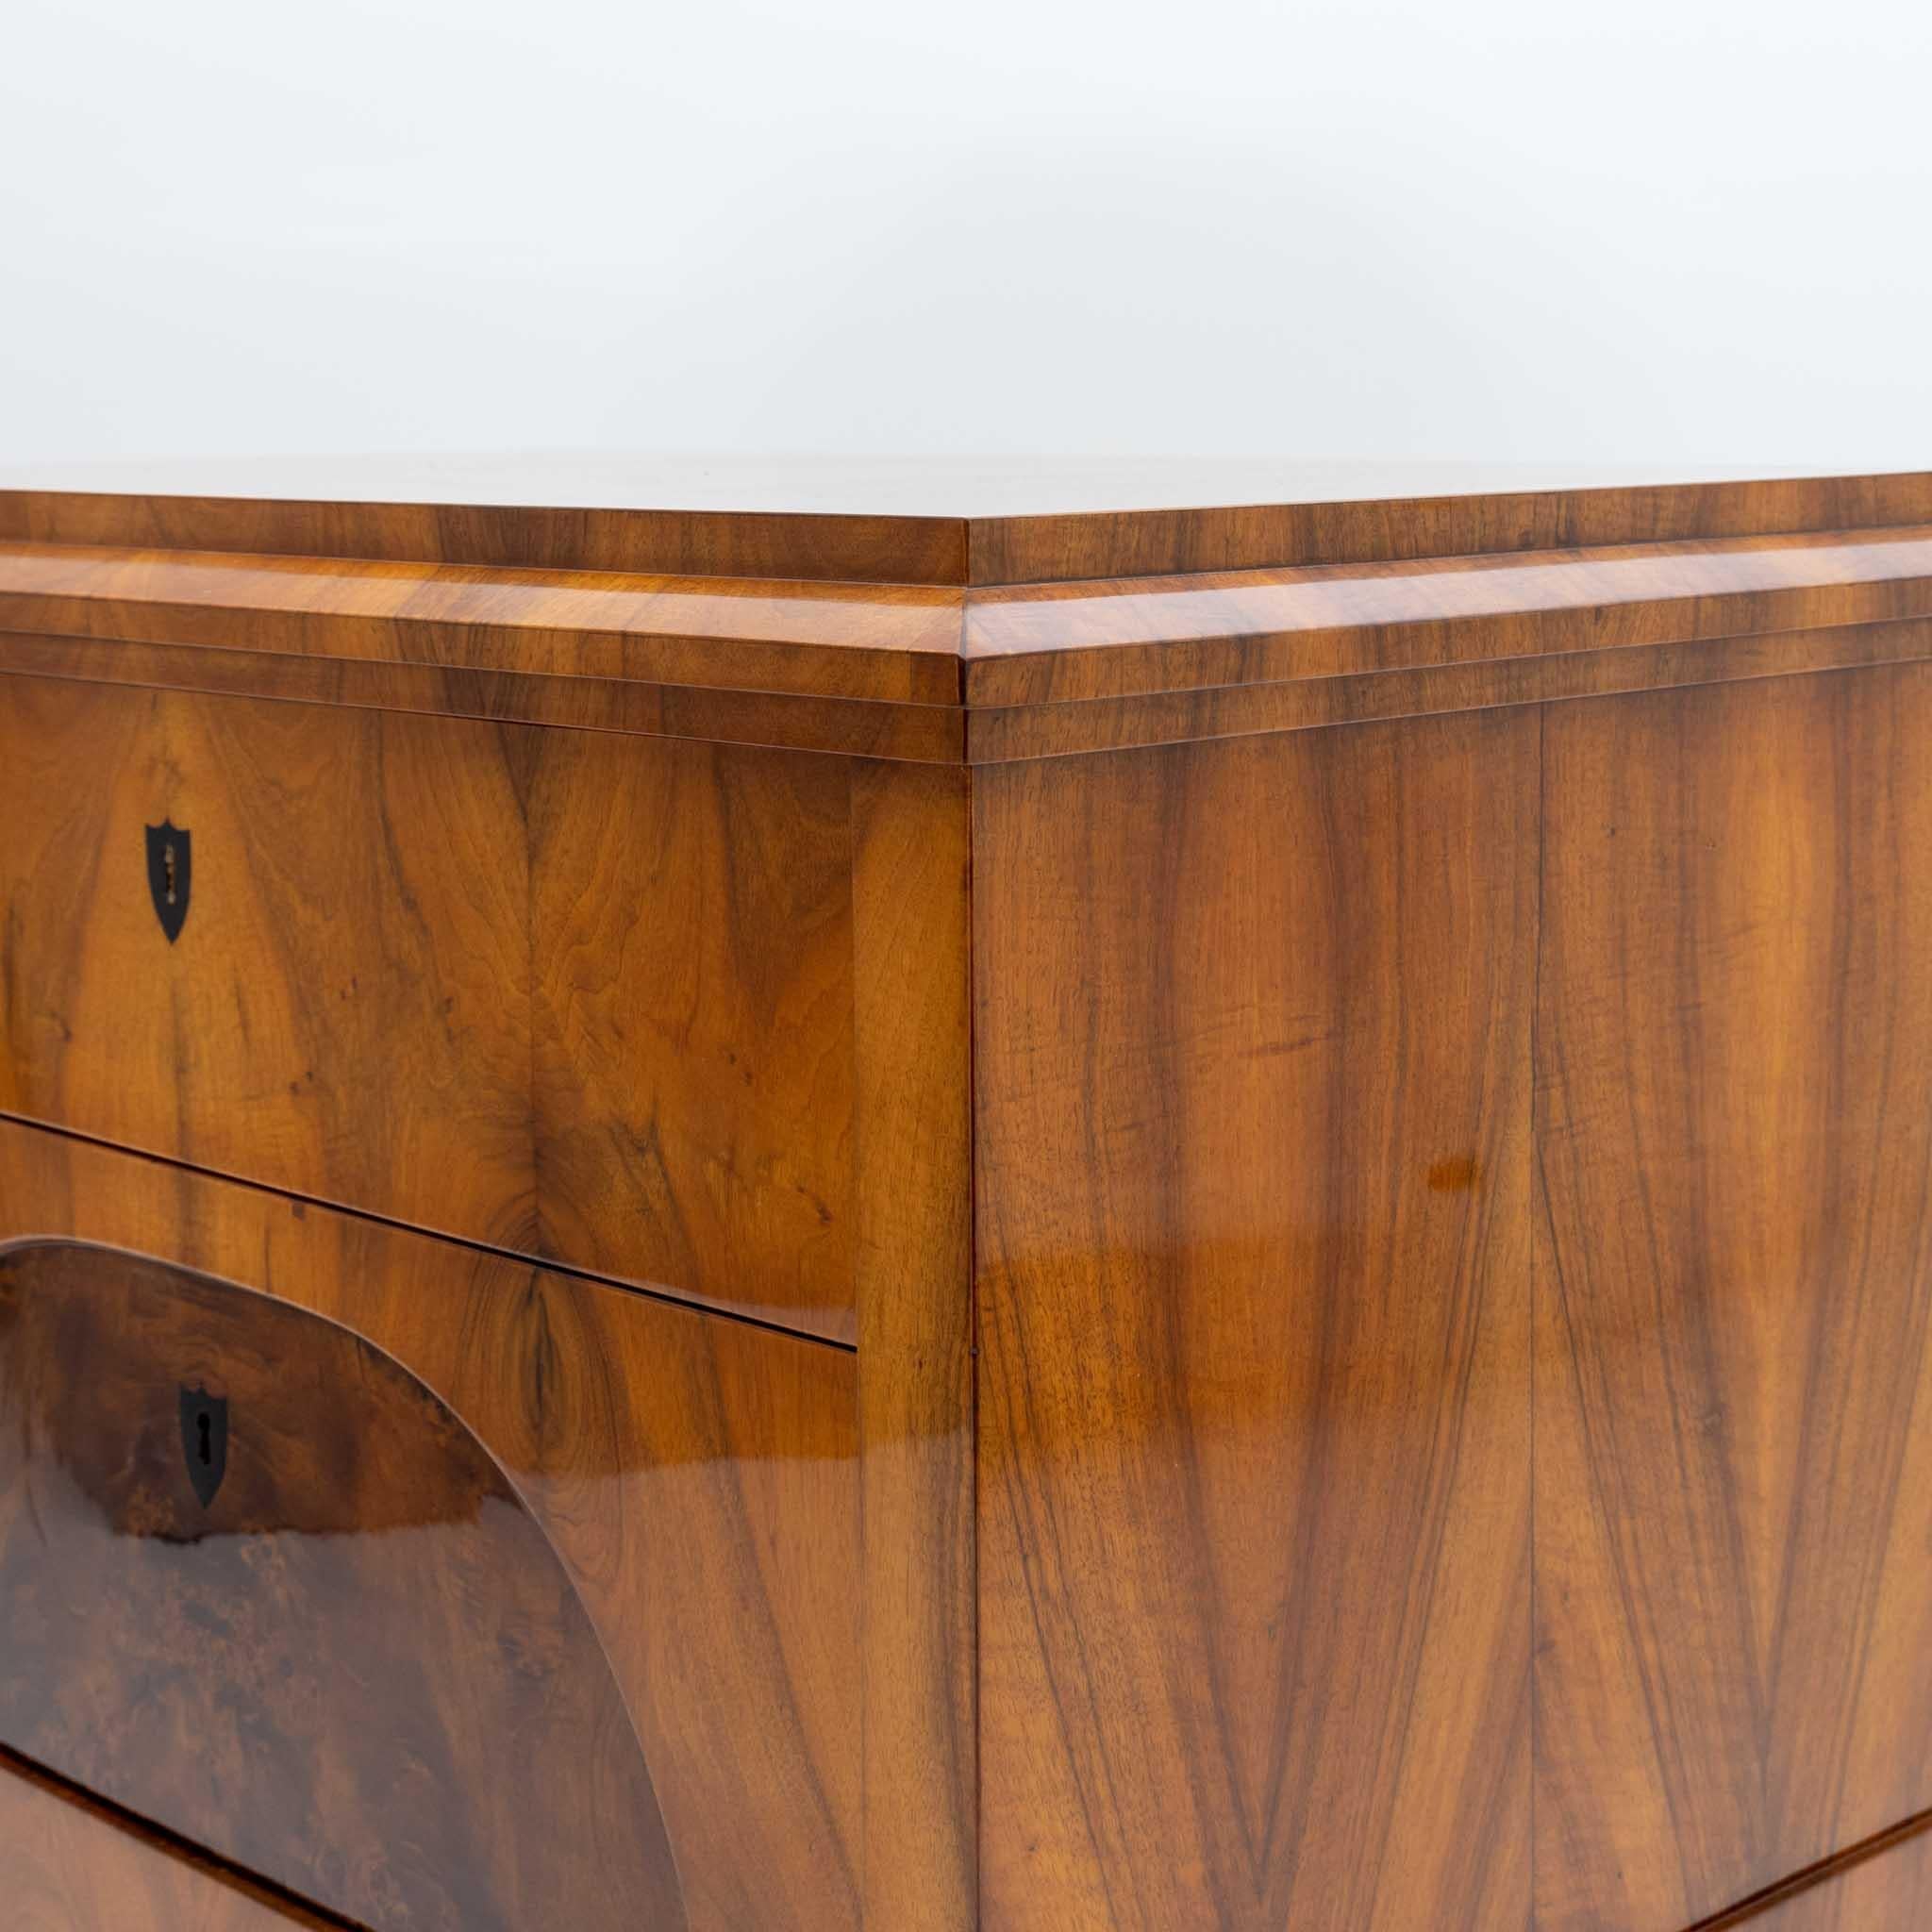 A Biedermeier chest of drawers in an architectural style.
Crafted in walnut veneer and walnut burl. 
Ebonized fruitwood drawer details.